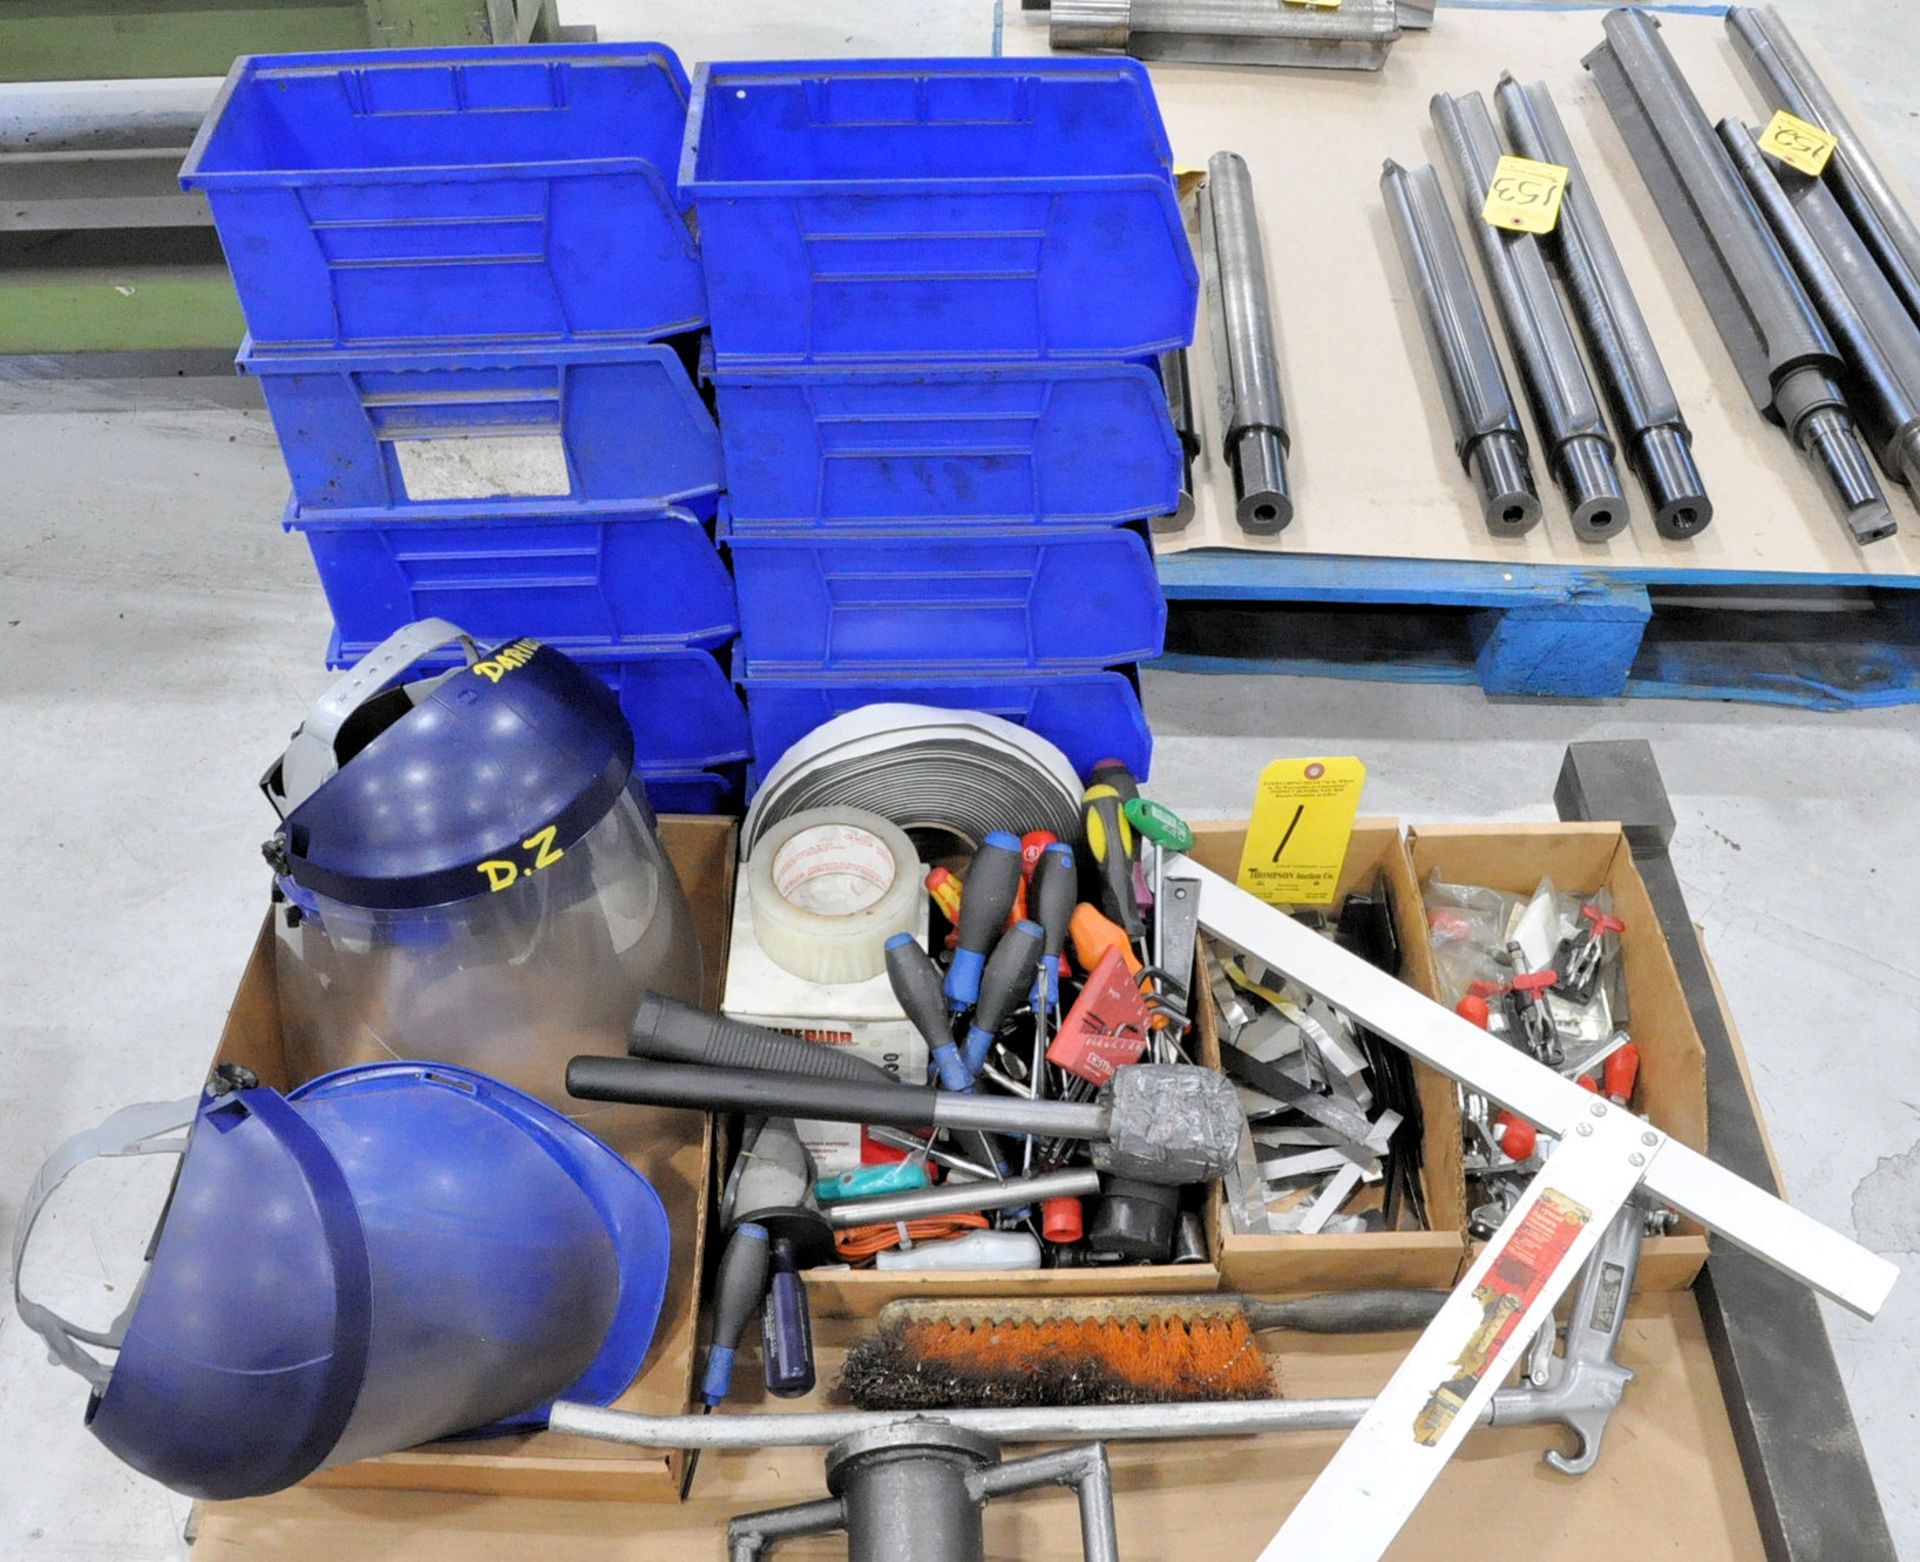 Lot, Hand Tools, Face Shields, Parts Bins, Destaco Clamps, Air Hose, and Set up in (6) Boxes - Image 2 of 3